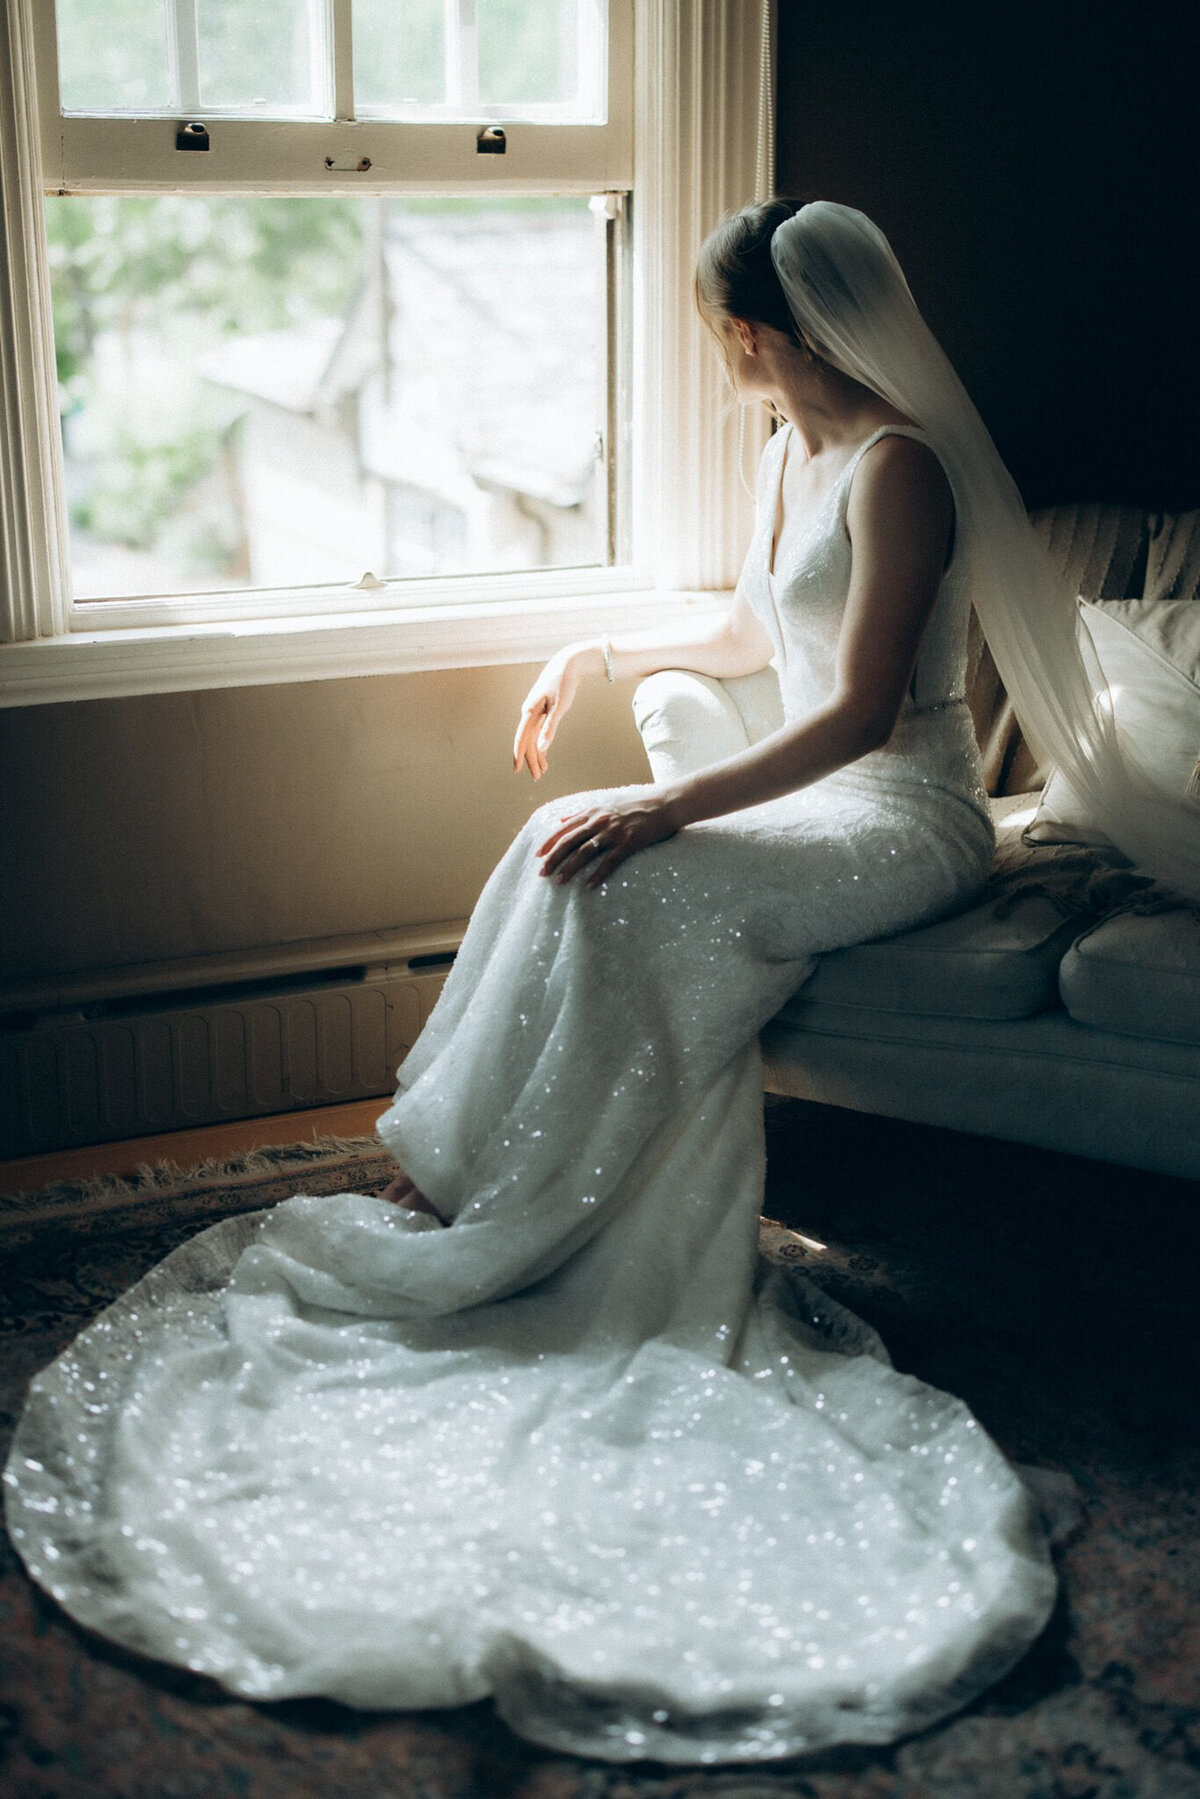 Bridal portrait by Victoria Pattemore, adventurous and authentic wedding photographer in Calgary, Alberta. Featured on the Bronte Bride Vendor Guide.